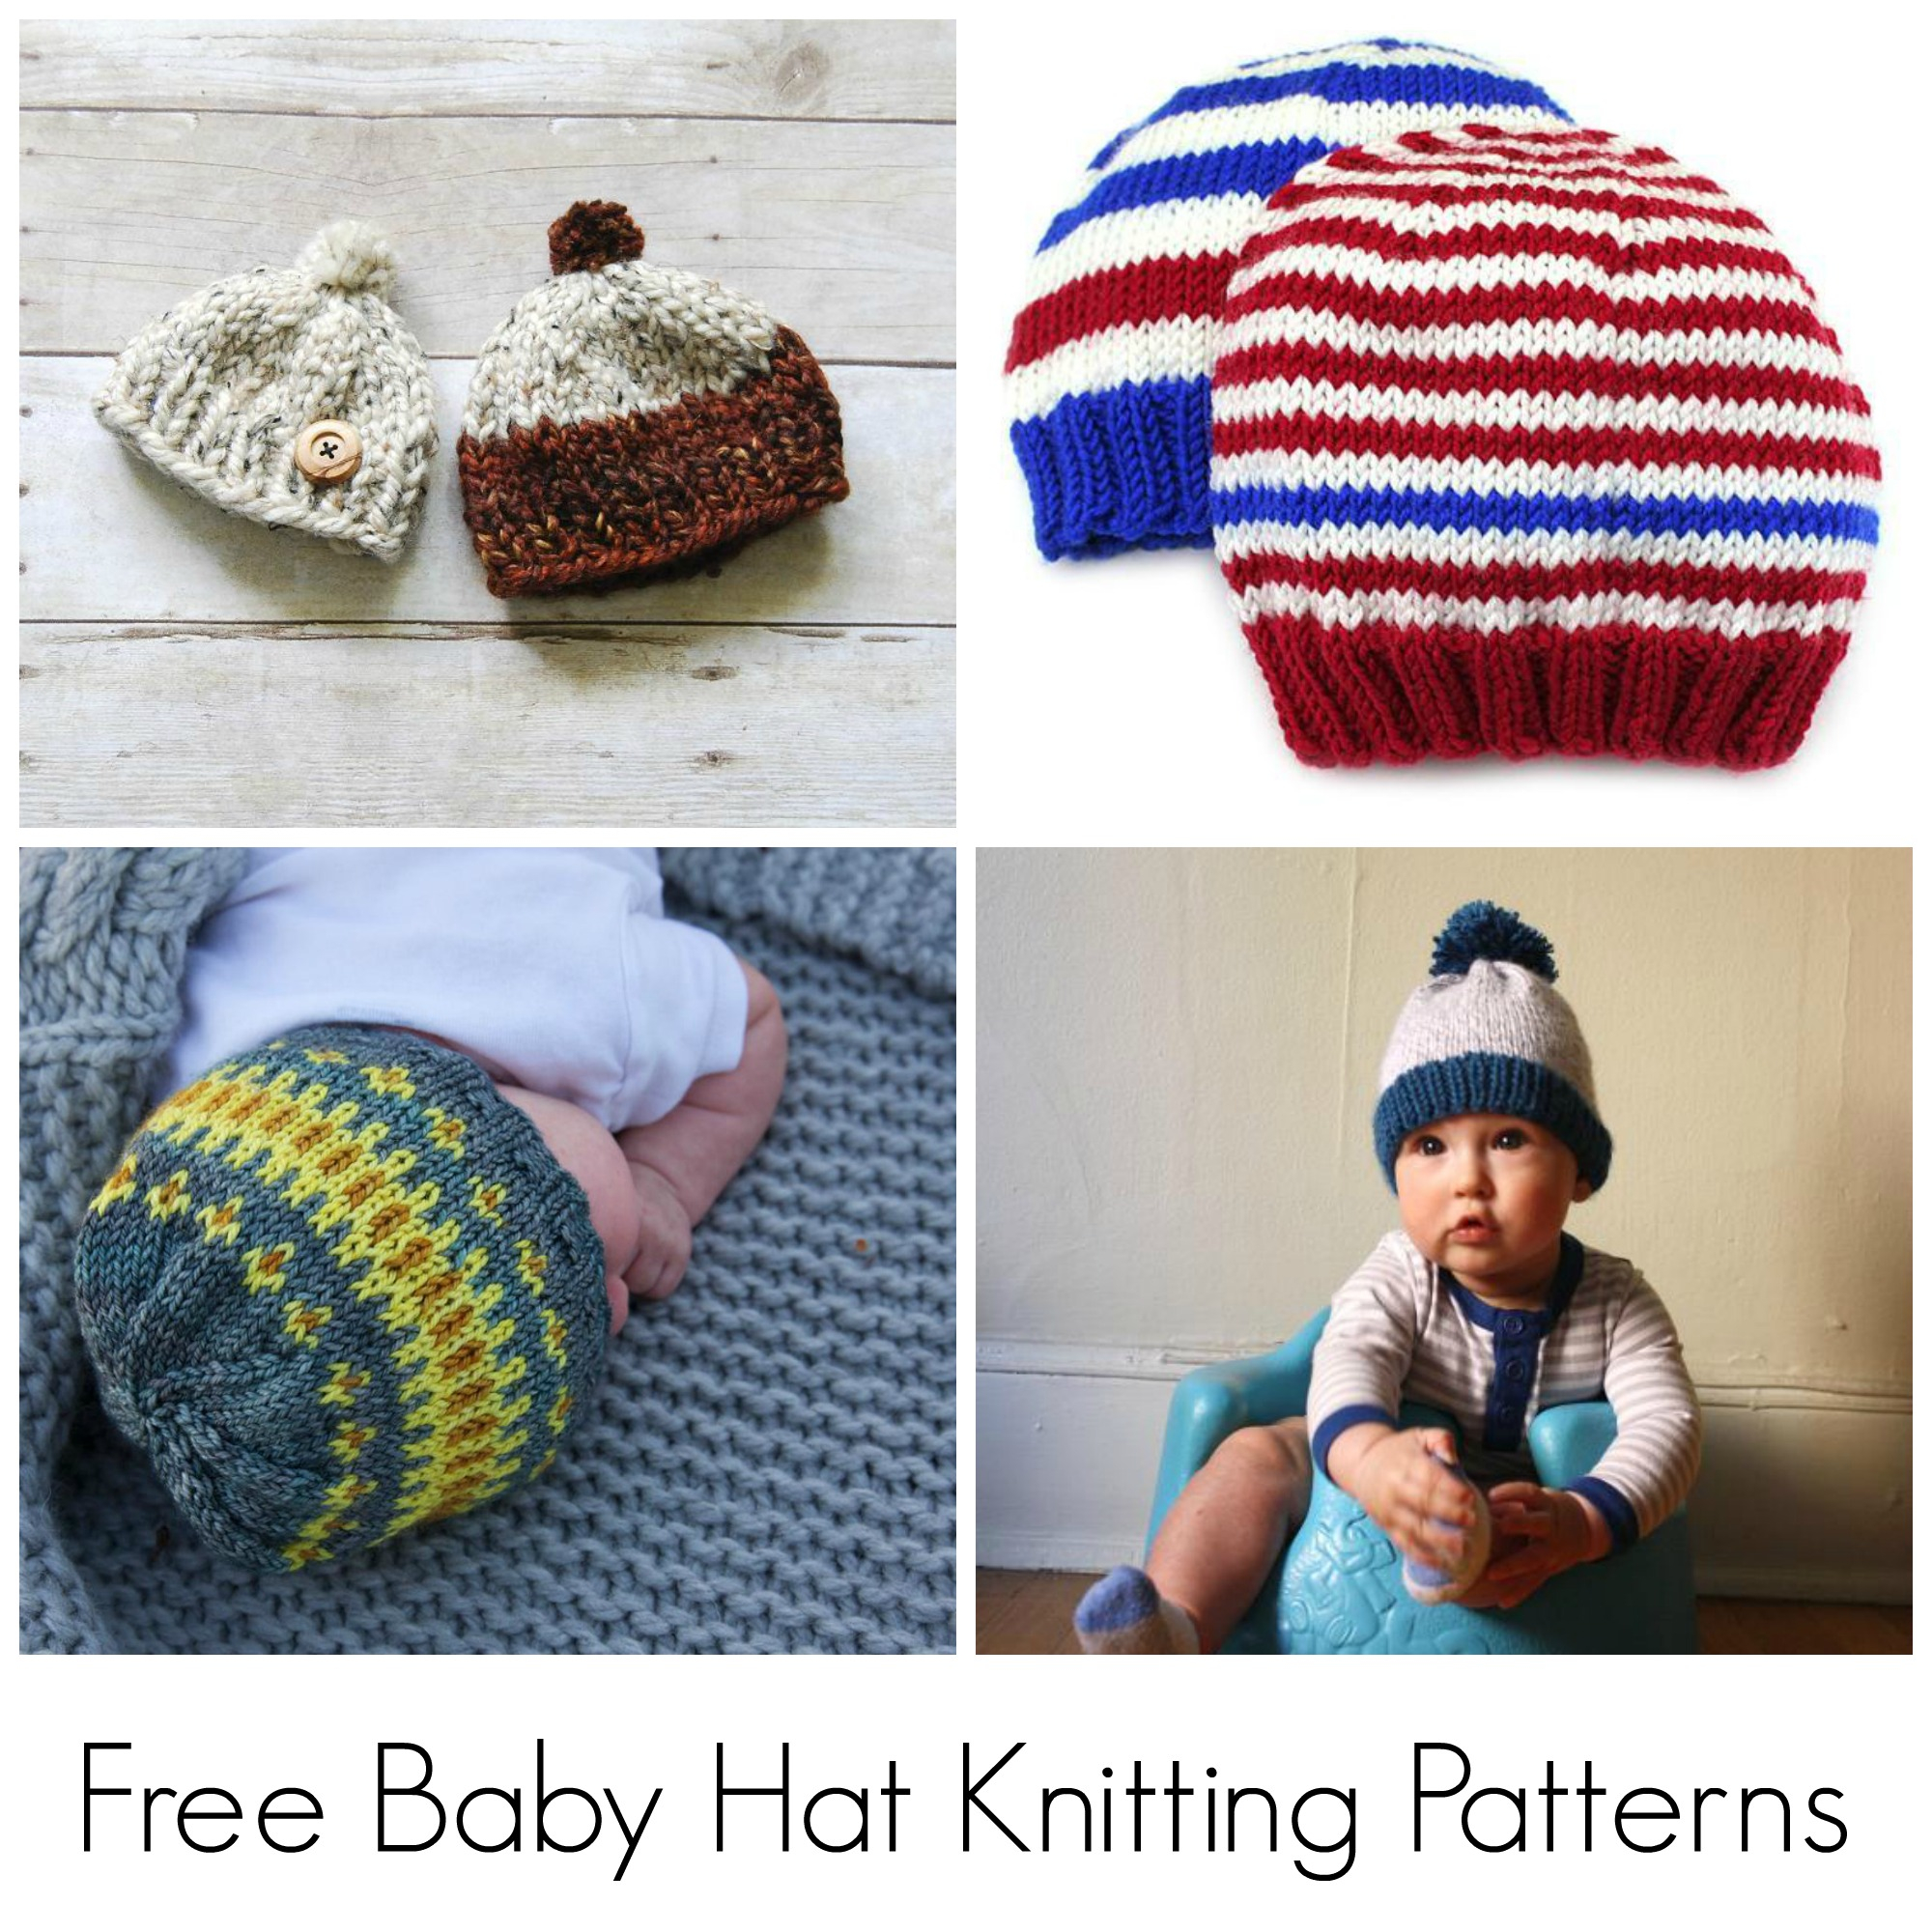 Free Baby Knitting Patterns Double Knit 10 Free Knitting Patterns For Ba Hats On Craftsy